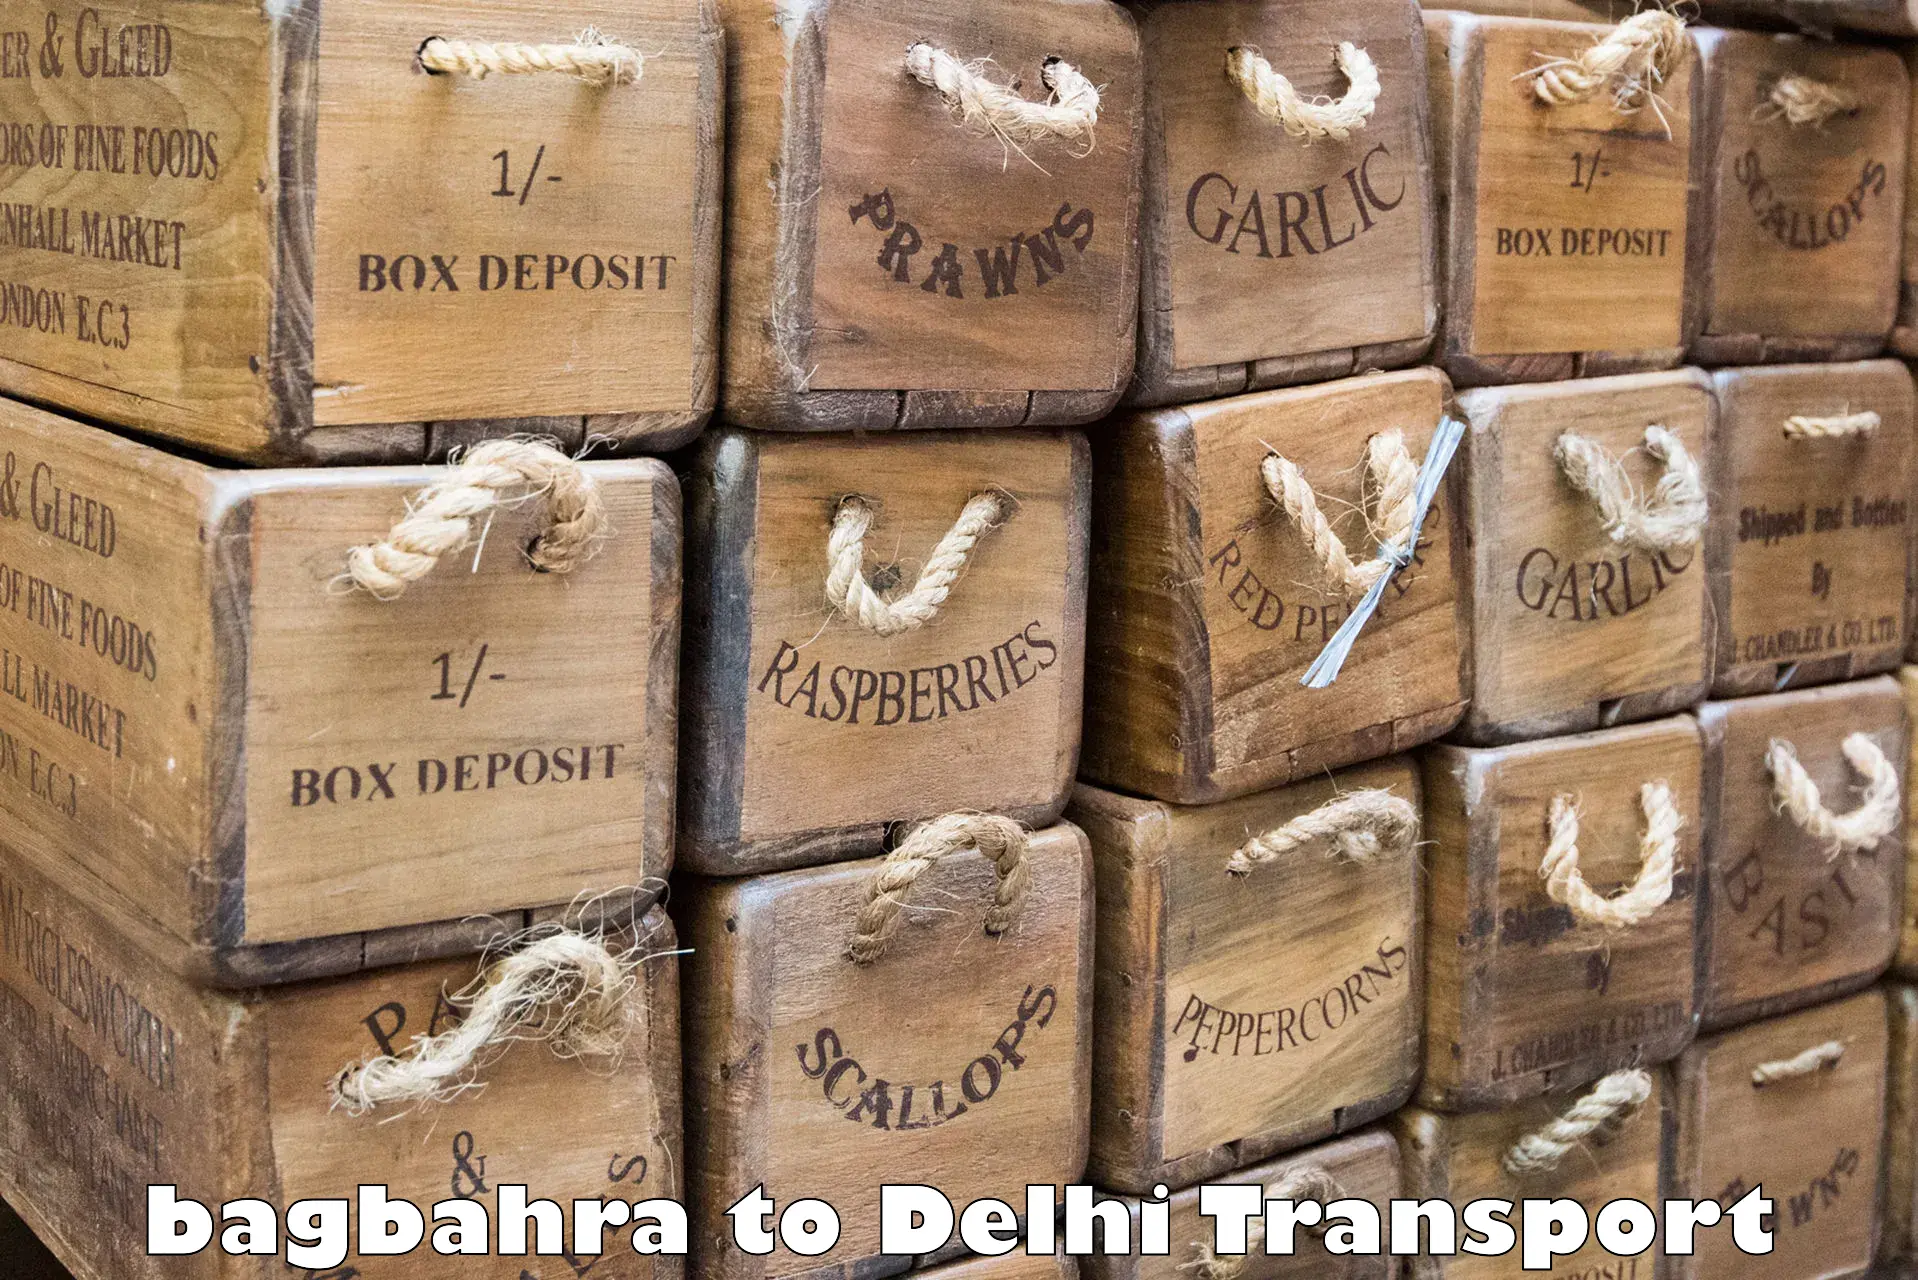 Container transport service bagbahra to Delhi